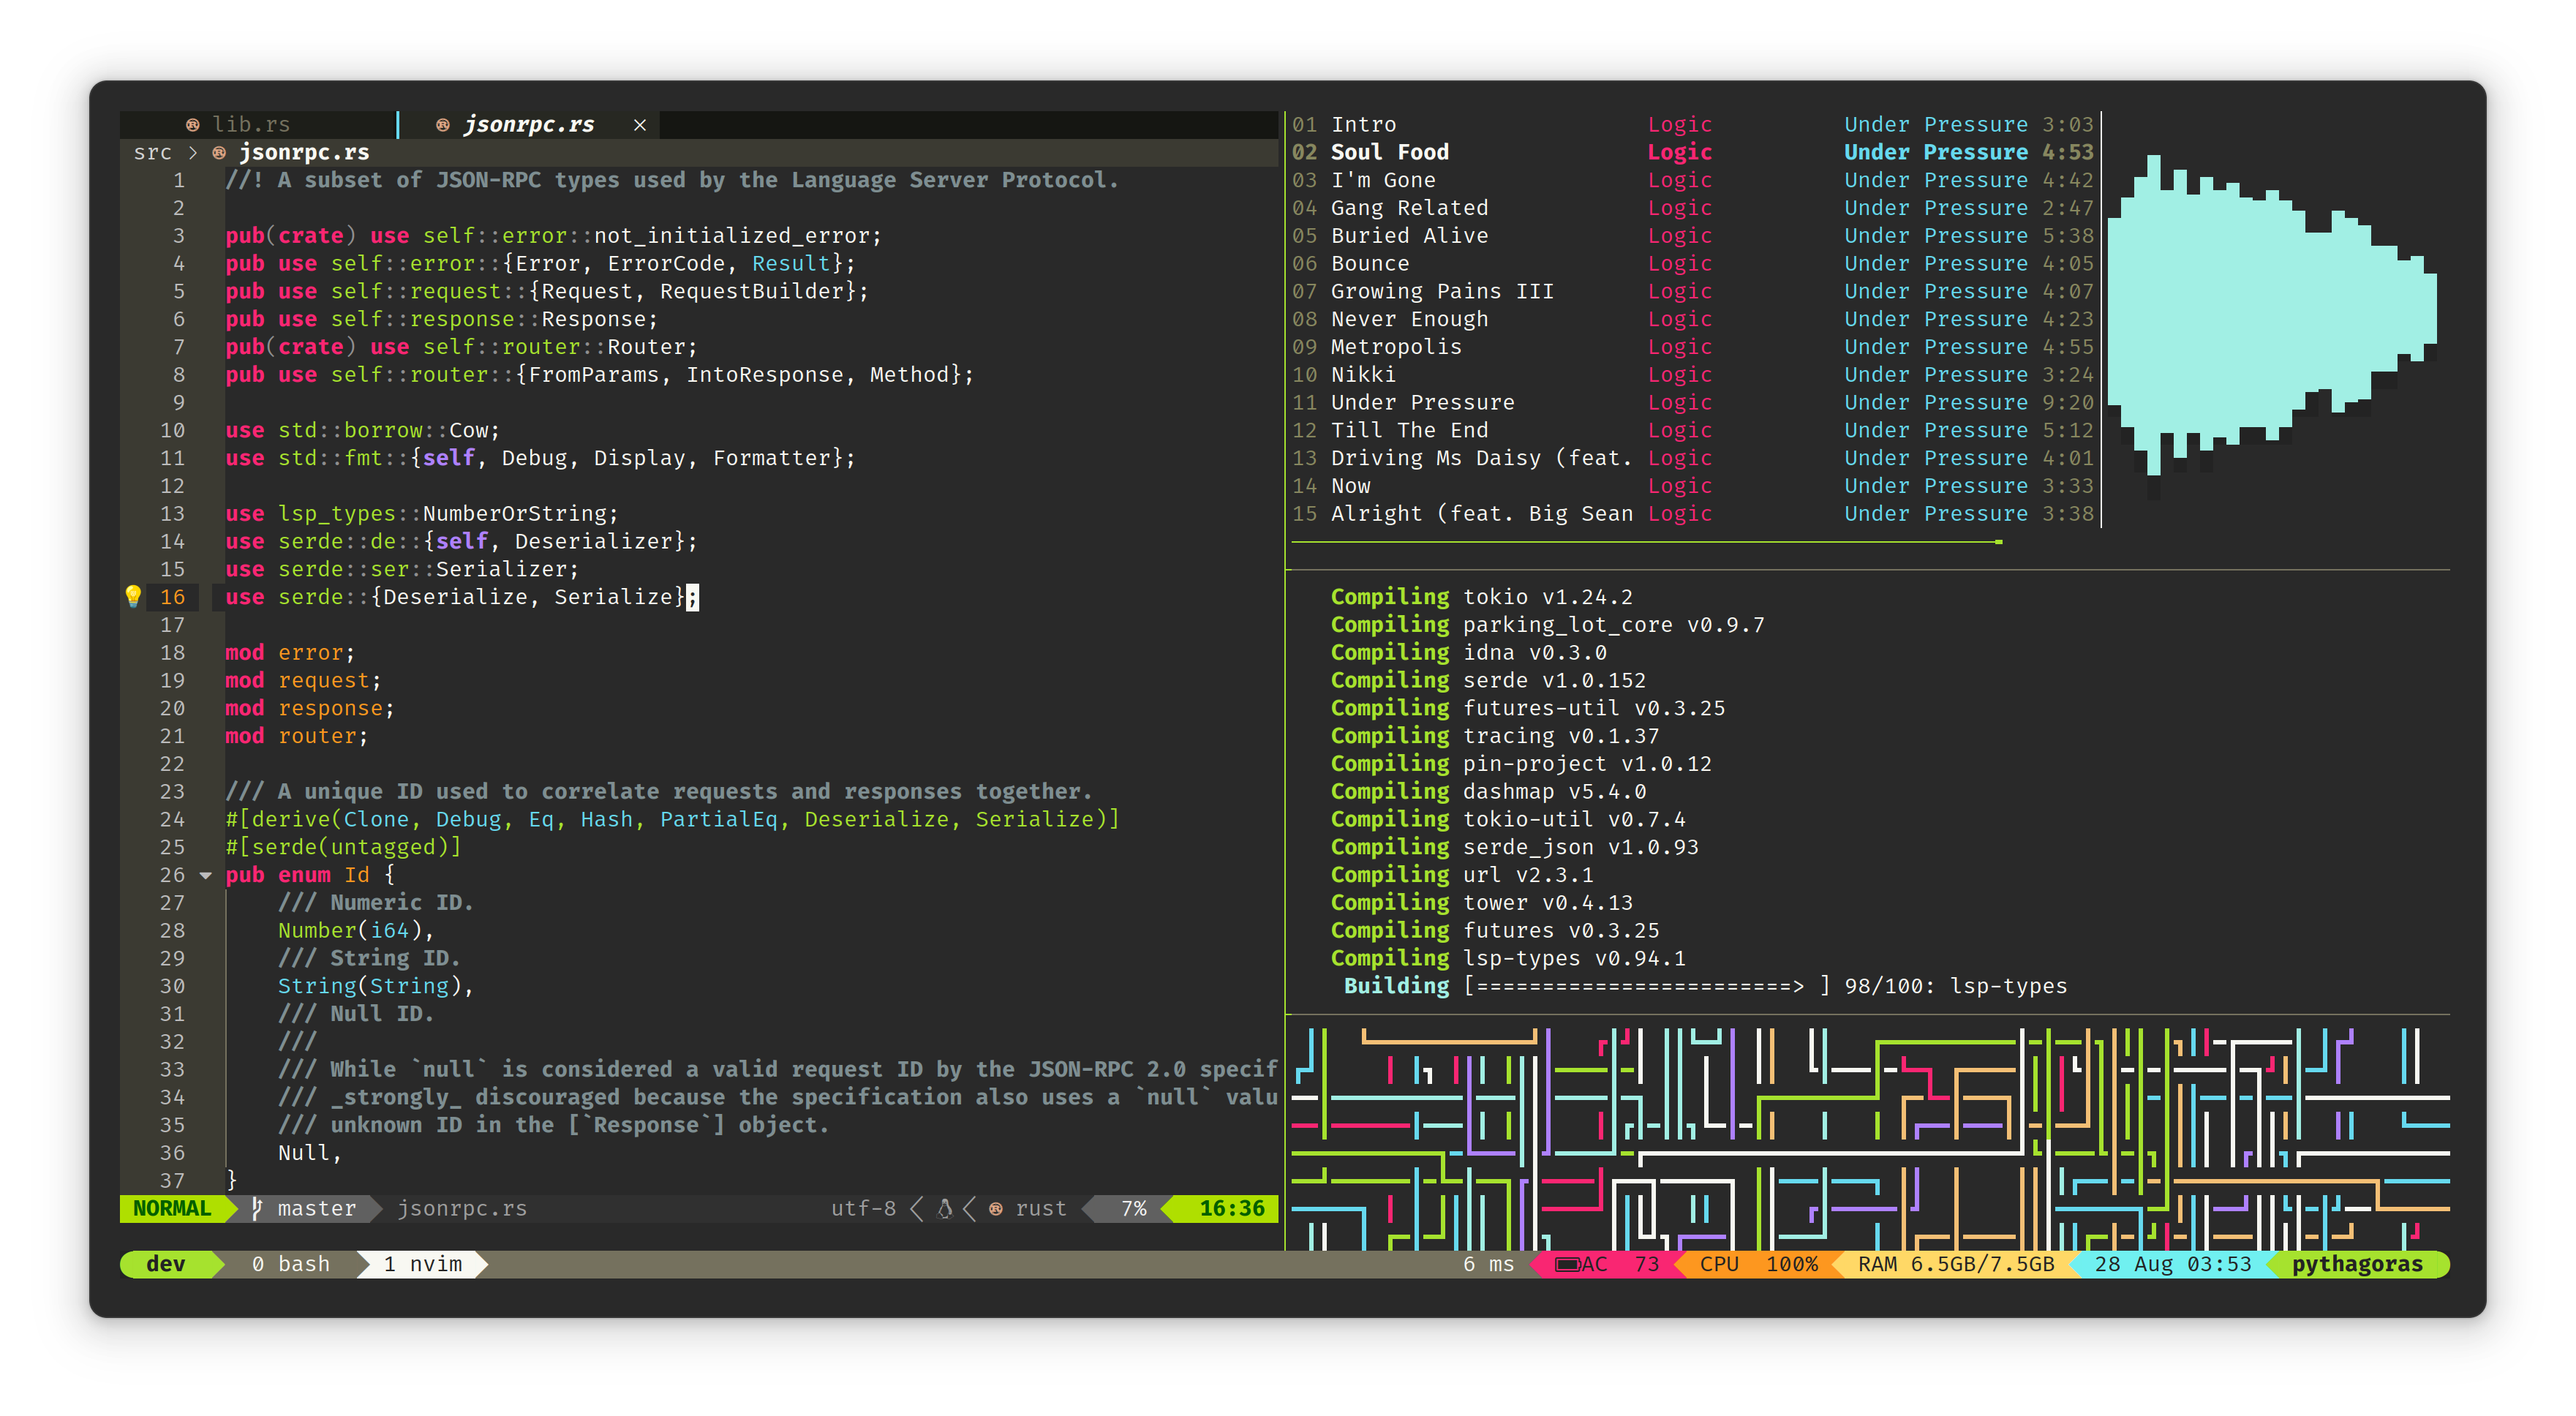 Screenshot of terminal in active use